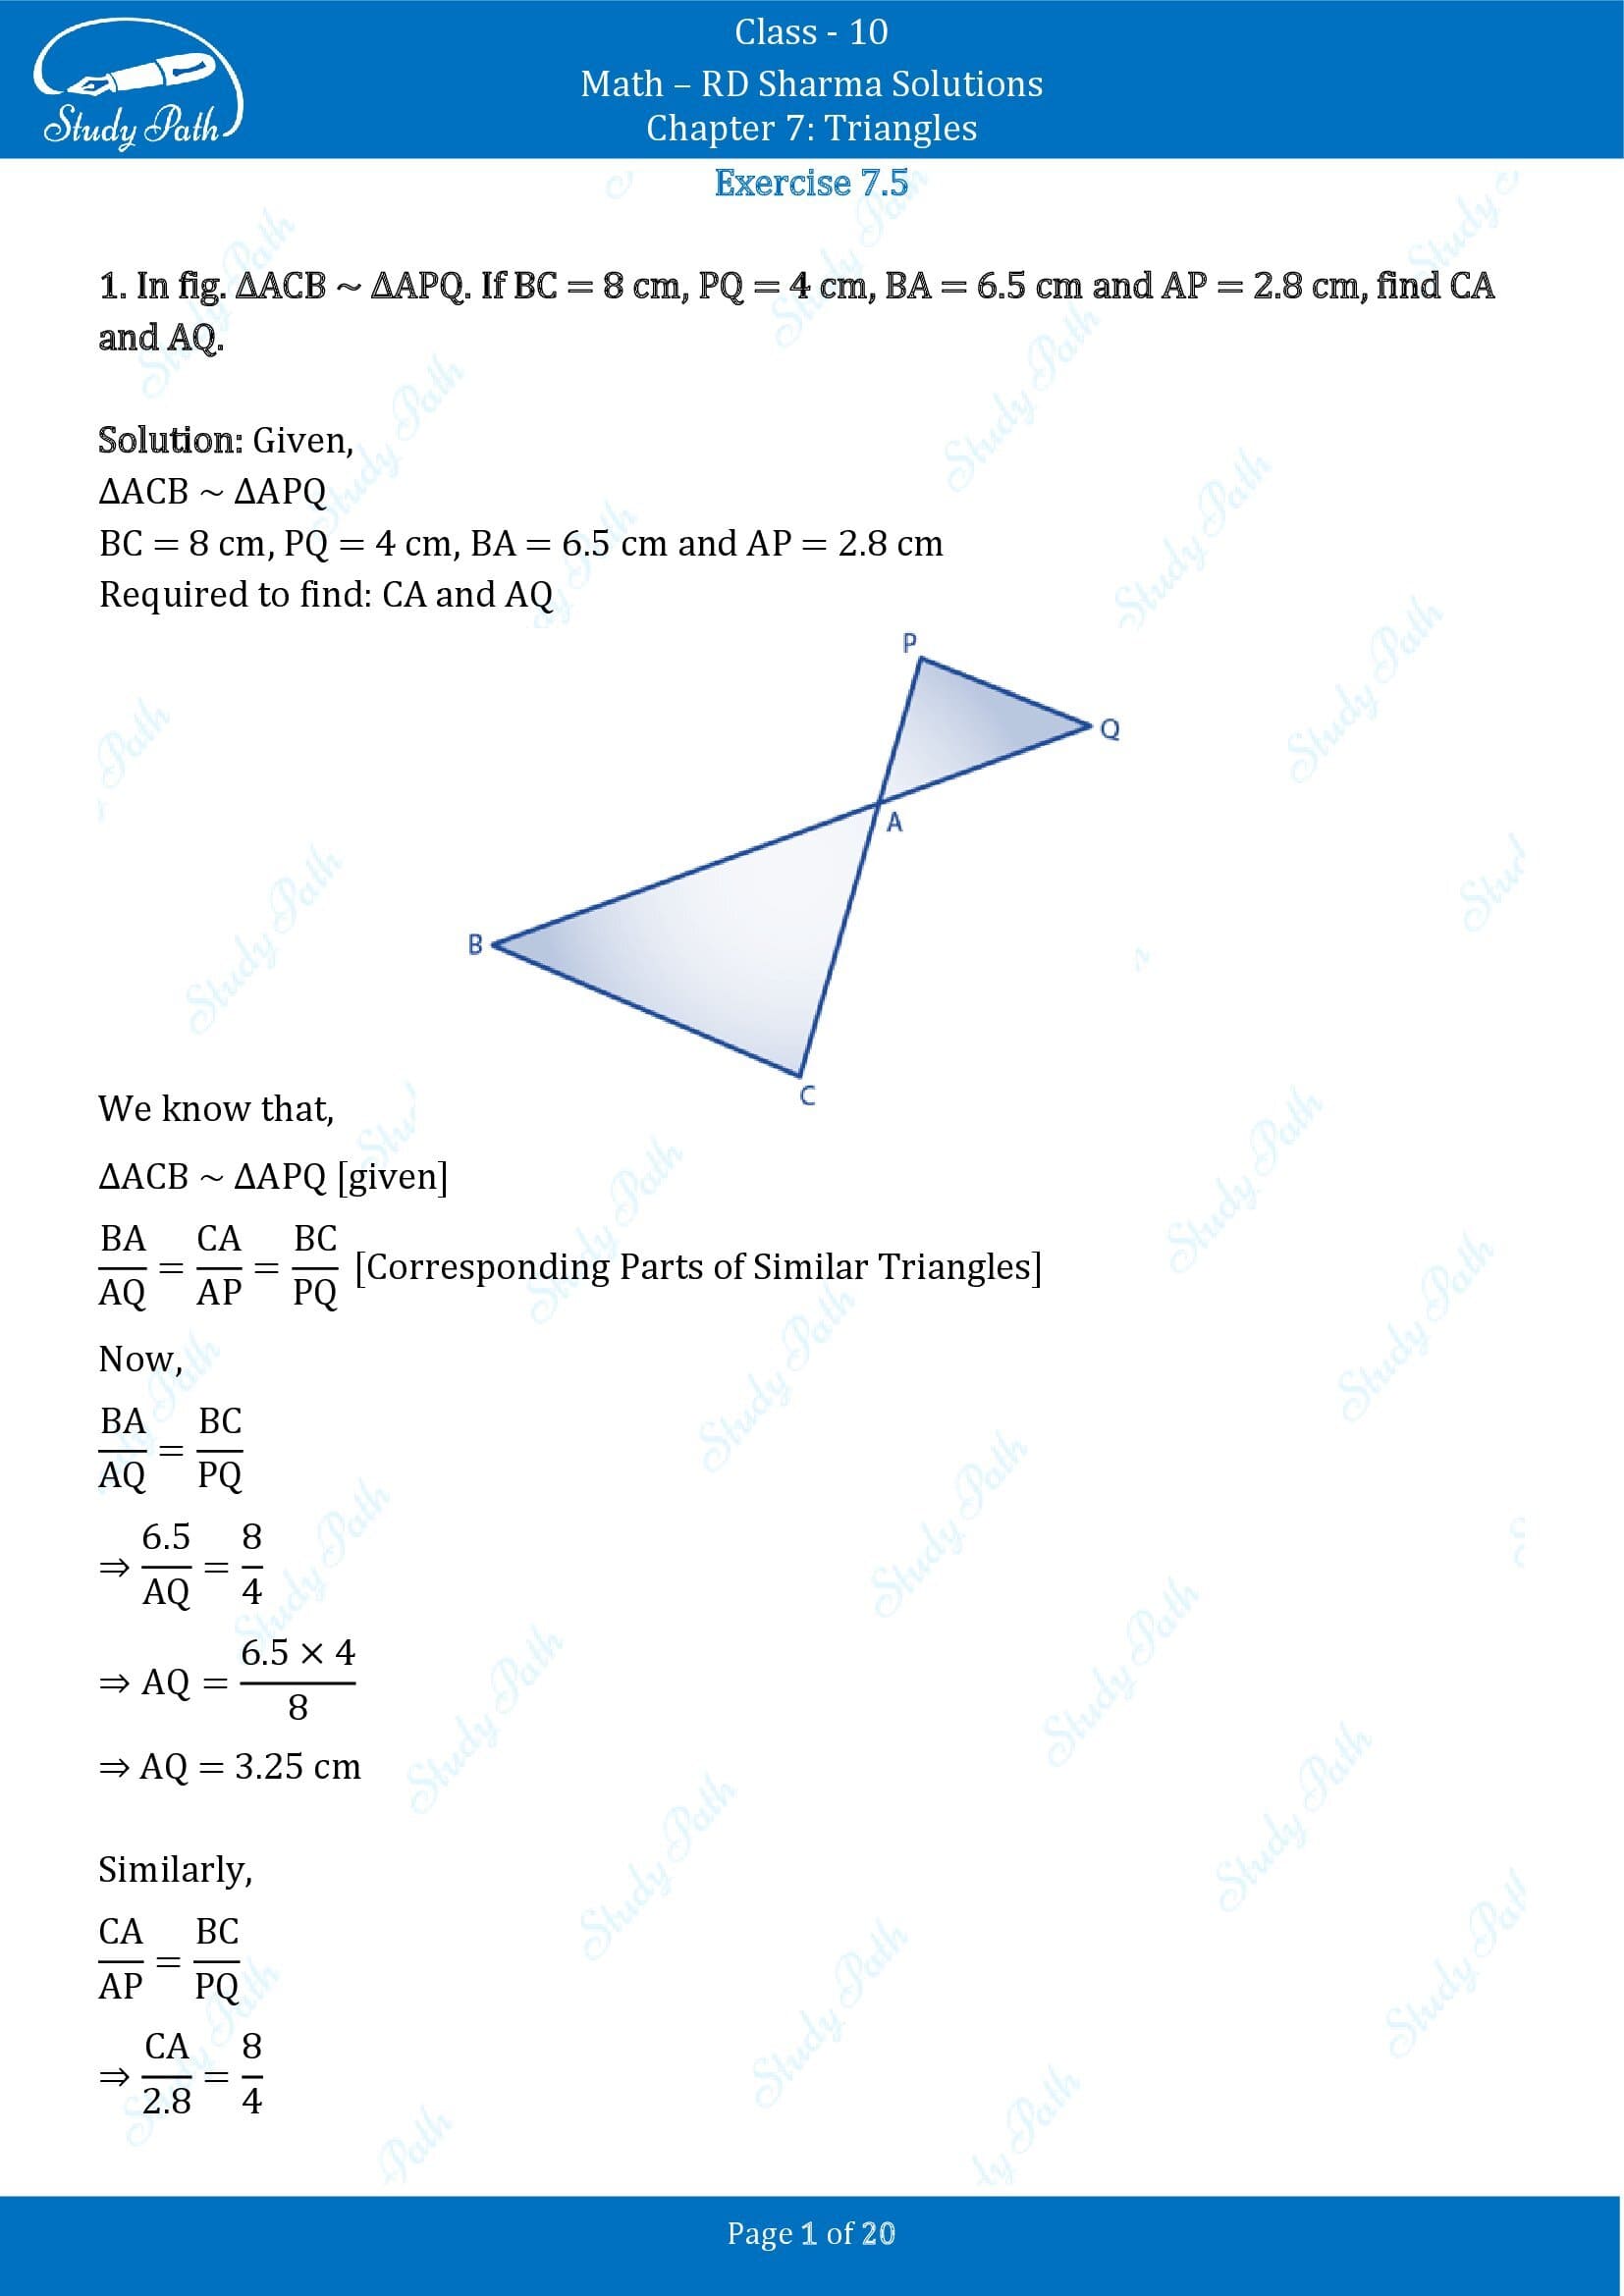 RD Sharma Solutions Class 10 Chapter 7 Triangles Exercise 7.5 00001